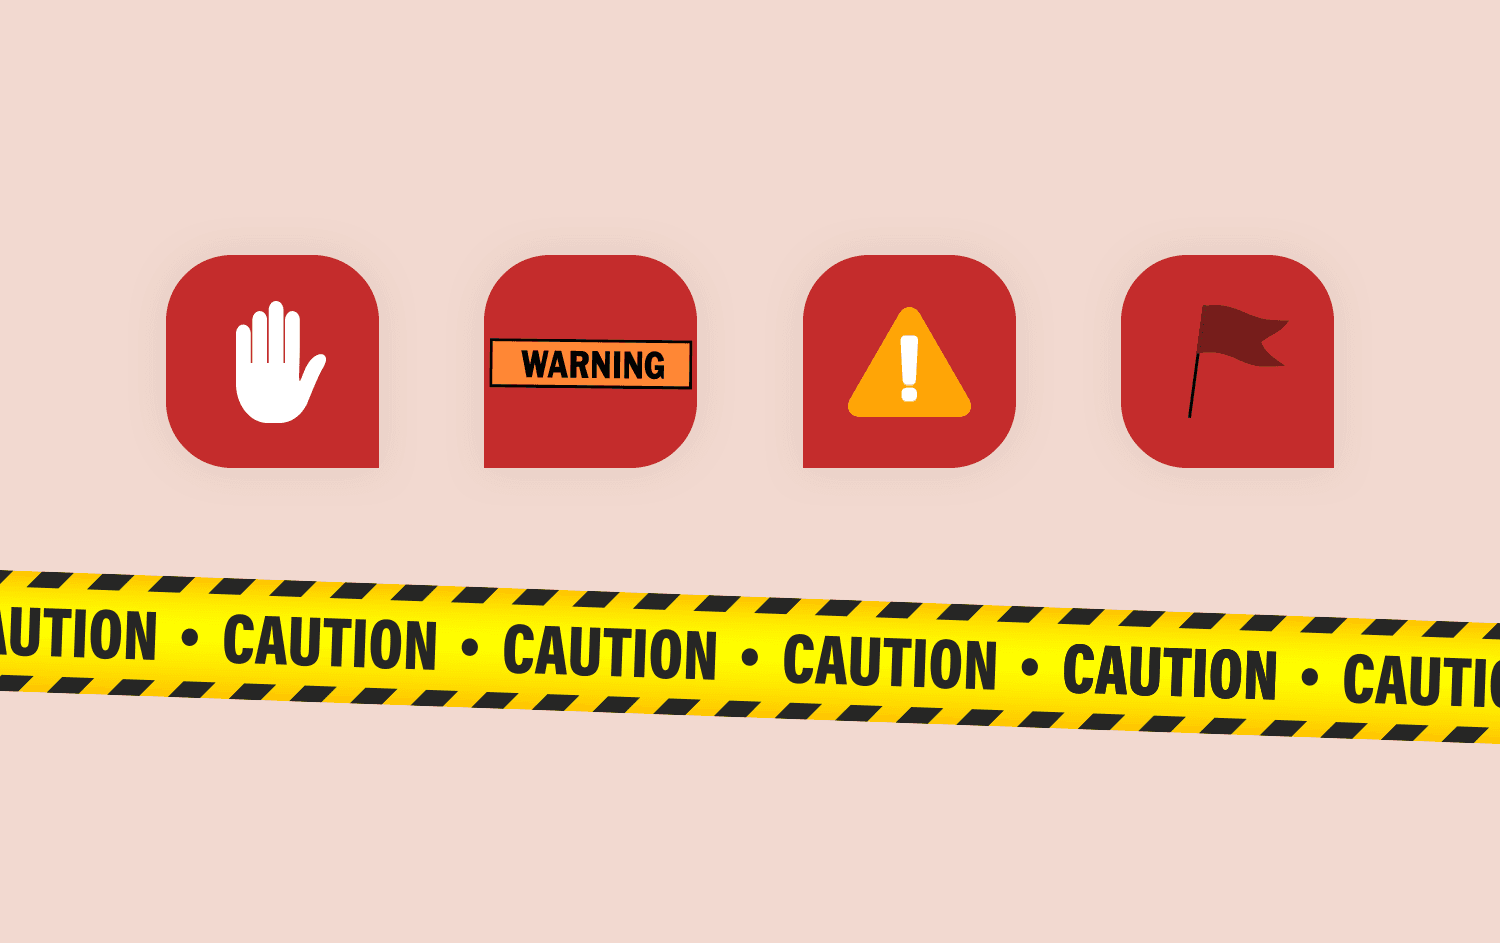 Cartoon representations of caution signs, warning signs, red flags